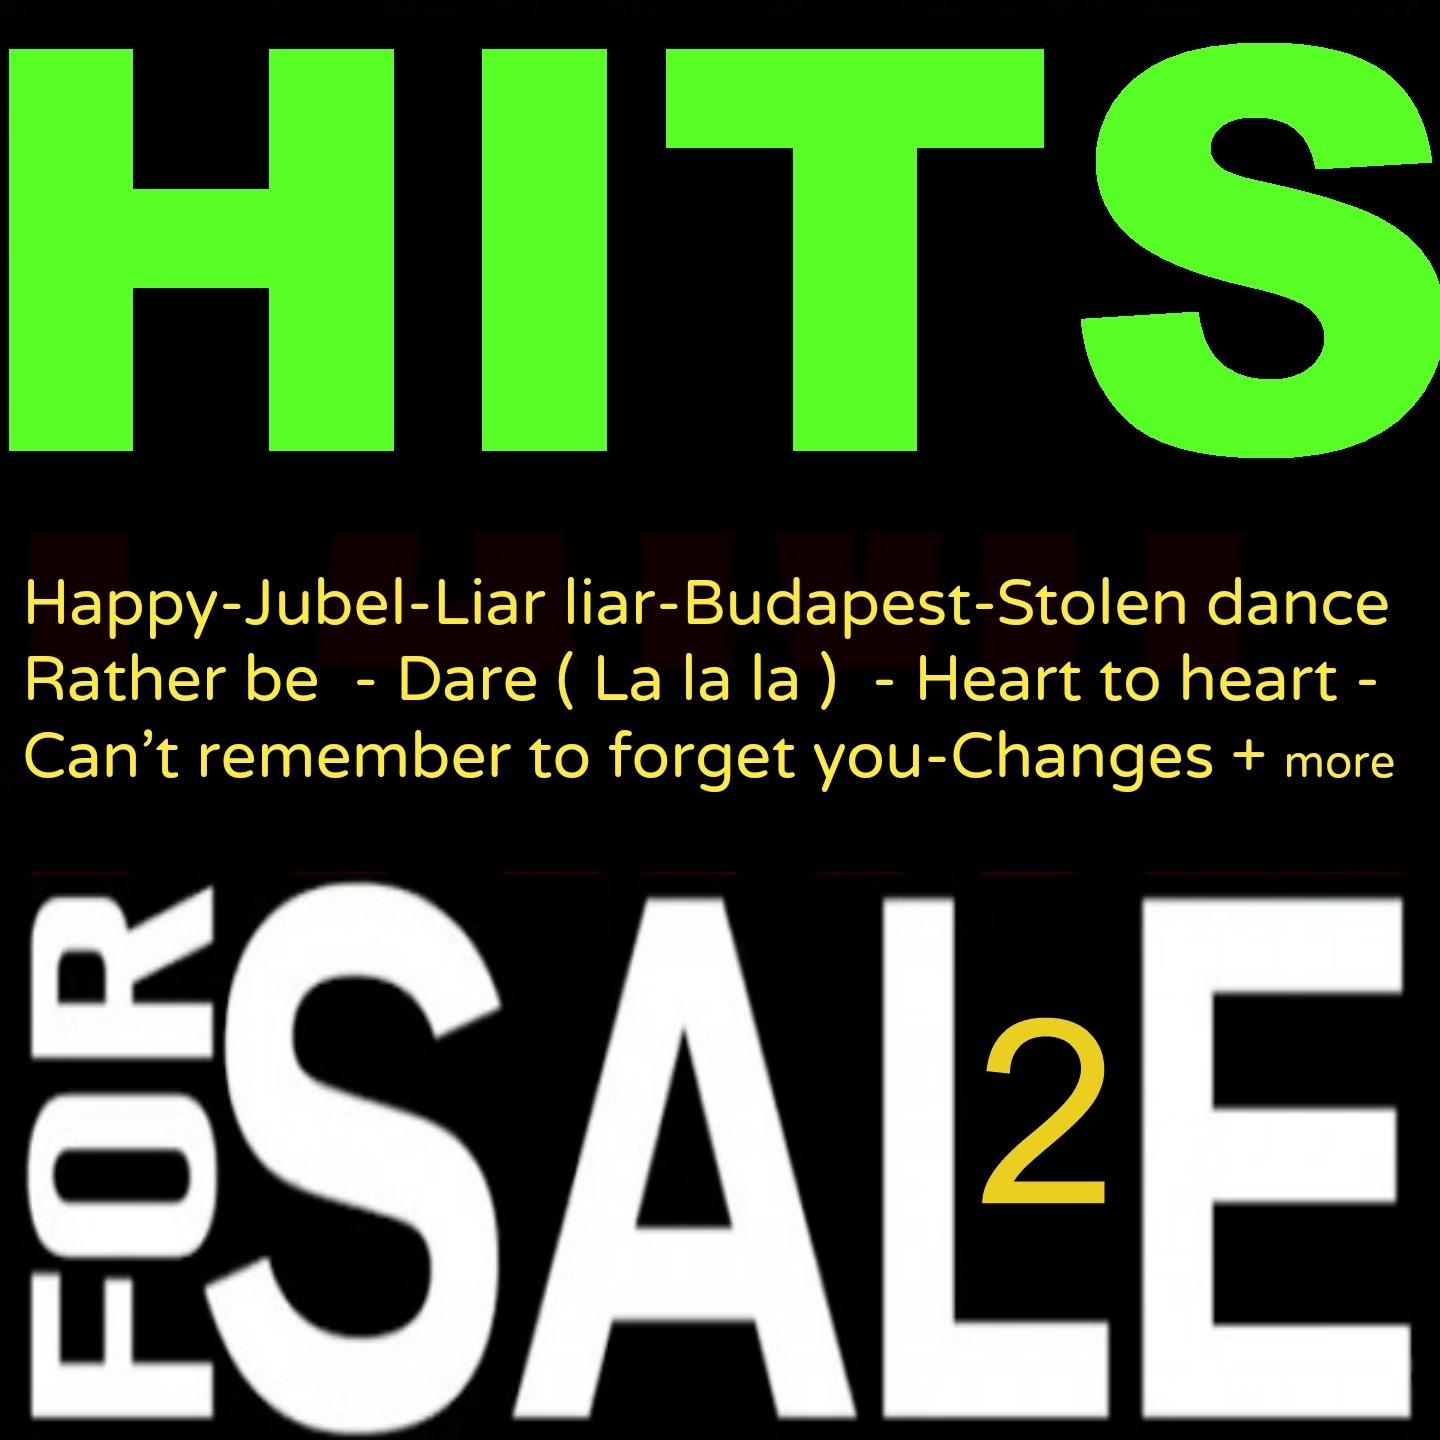 Hits for Sale, Vol. 2